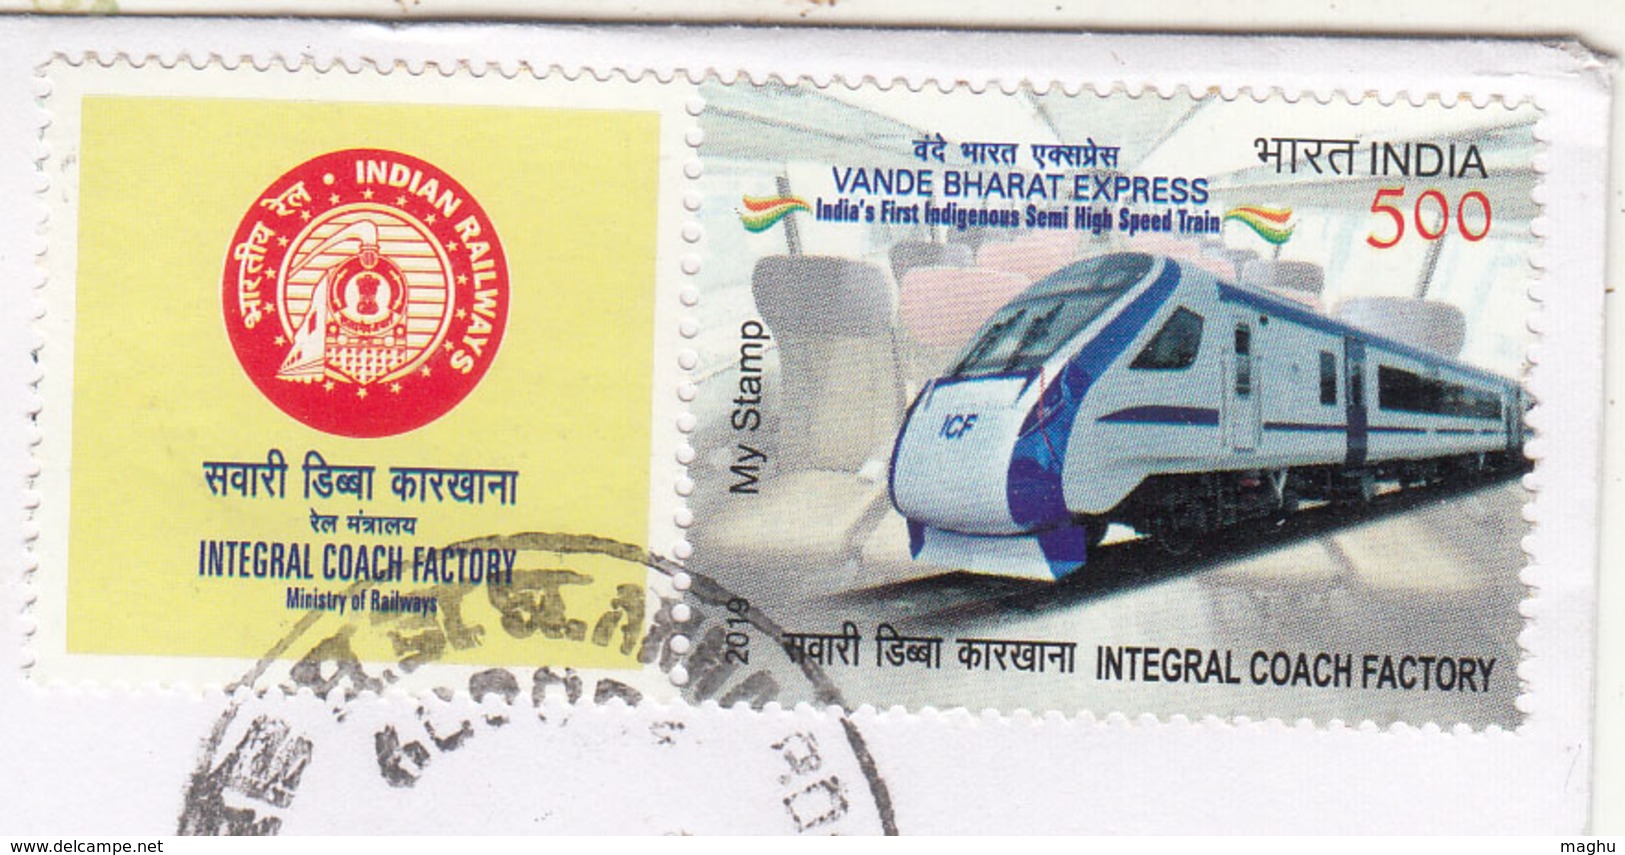 Postal Used My Stamp India 2019, Customized Issue, ICF Coach Factory, Train, Vande Bharat Express - Trains